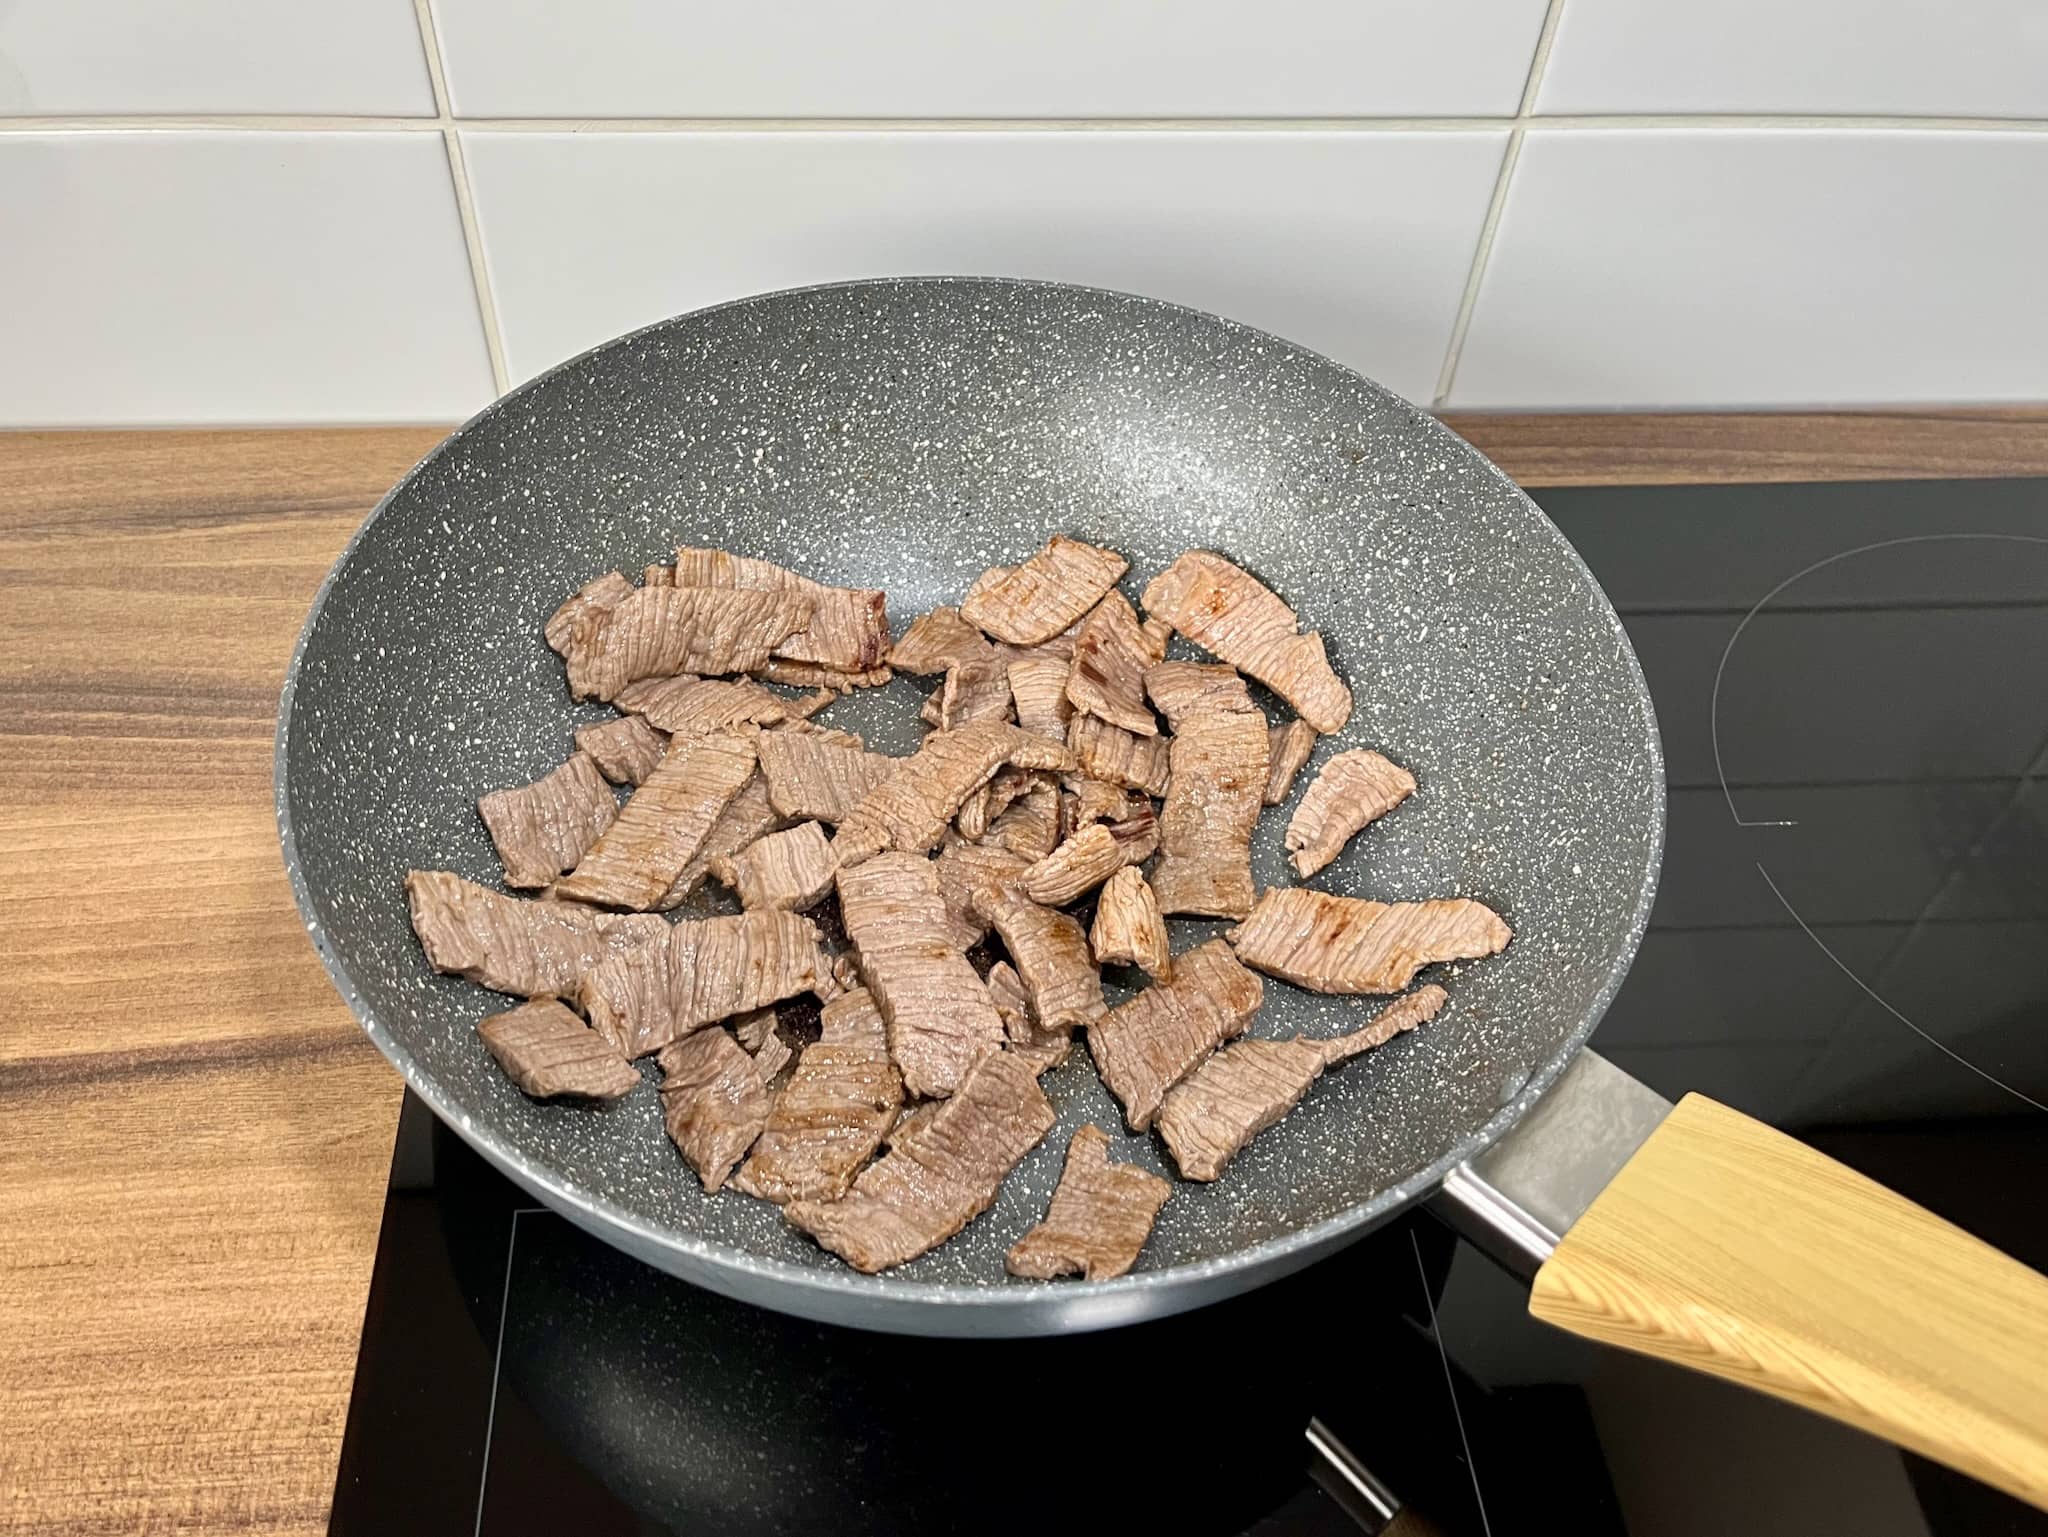 Steak meat slices, cooked to perfection, in a large skillet